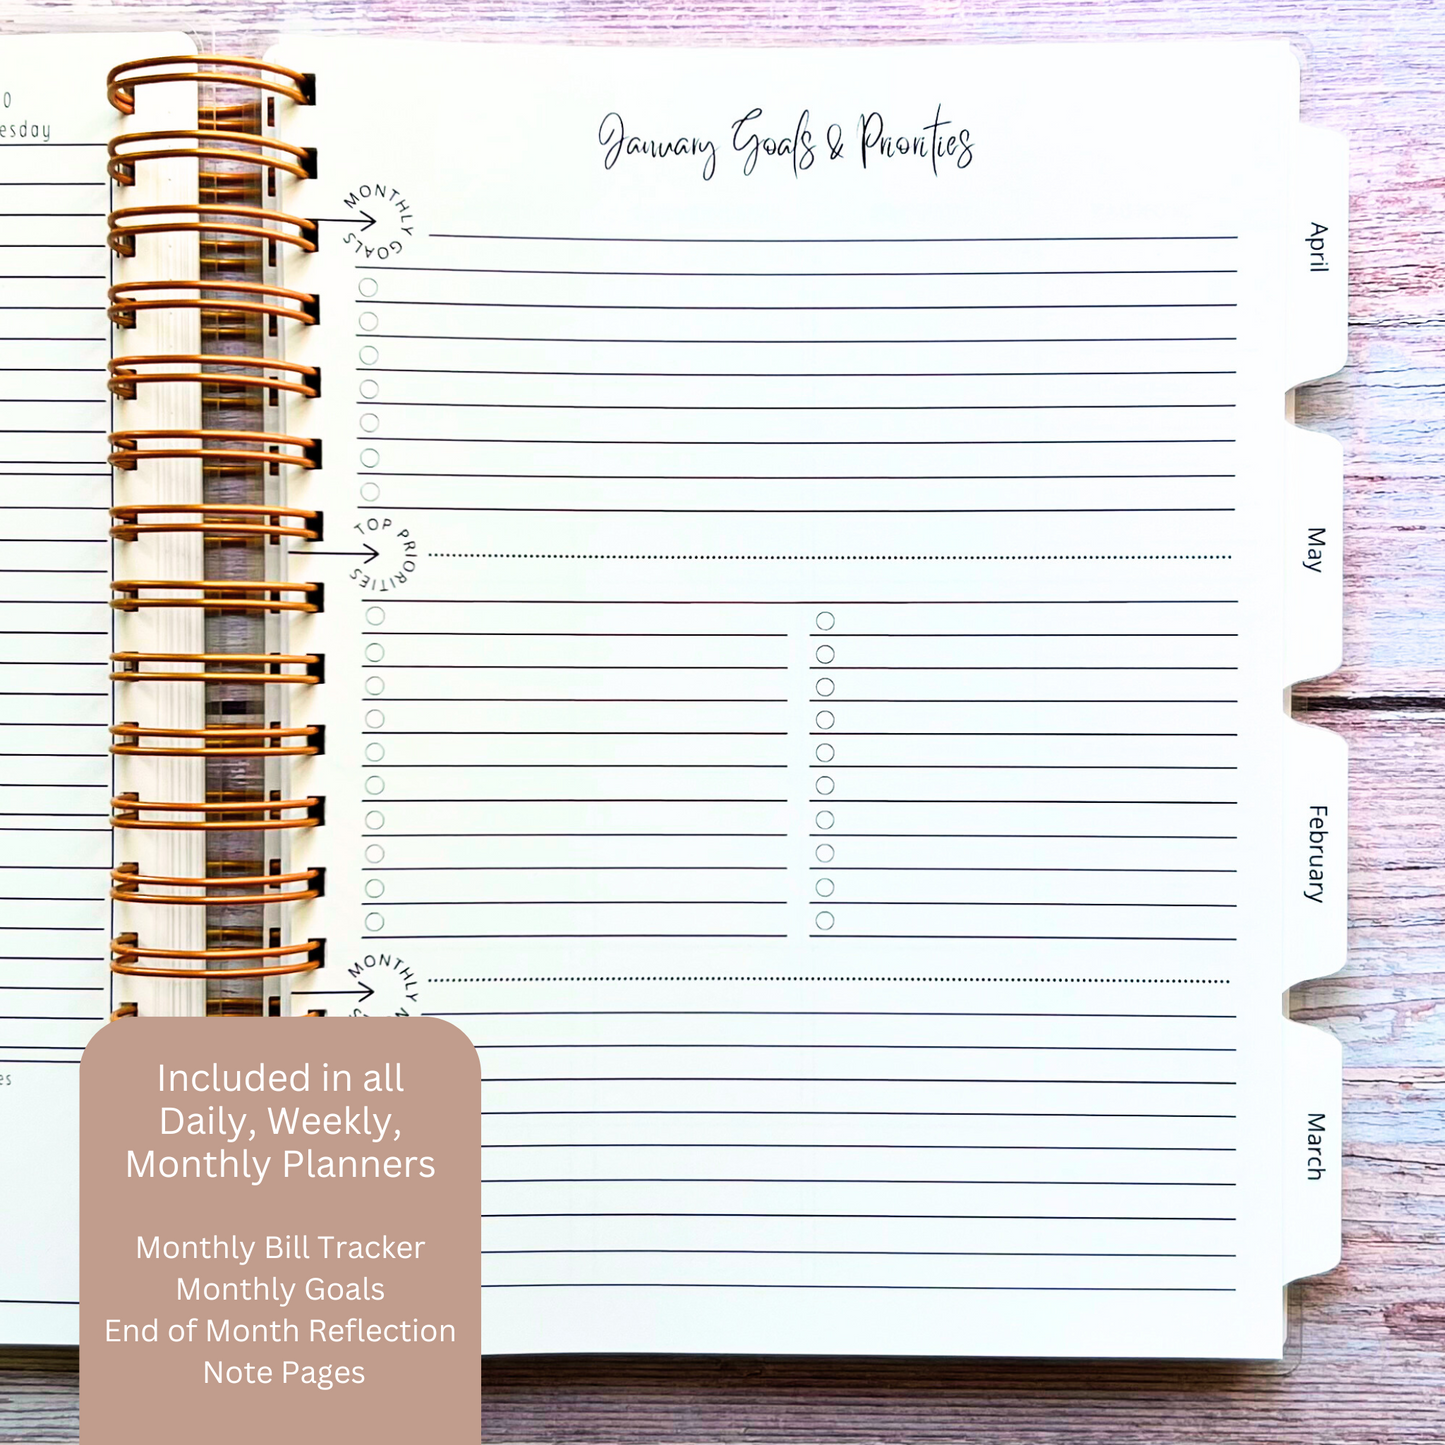 Personalized 6 Month Daily Planner | Sweet Tea & Jesus